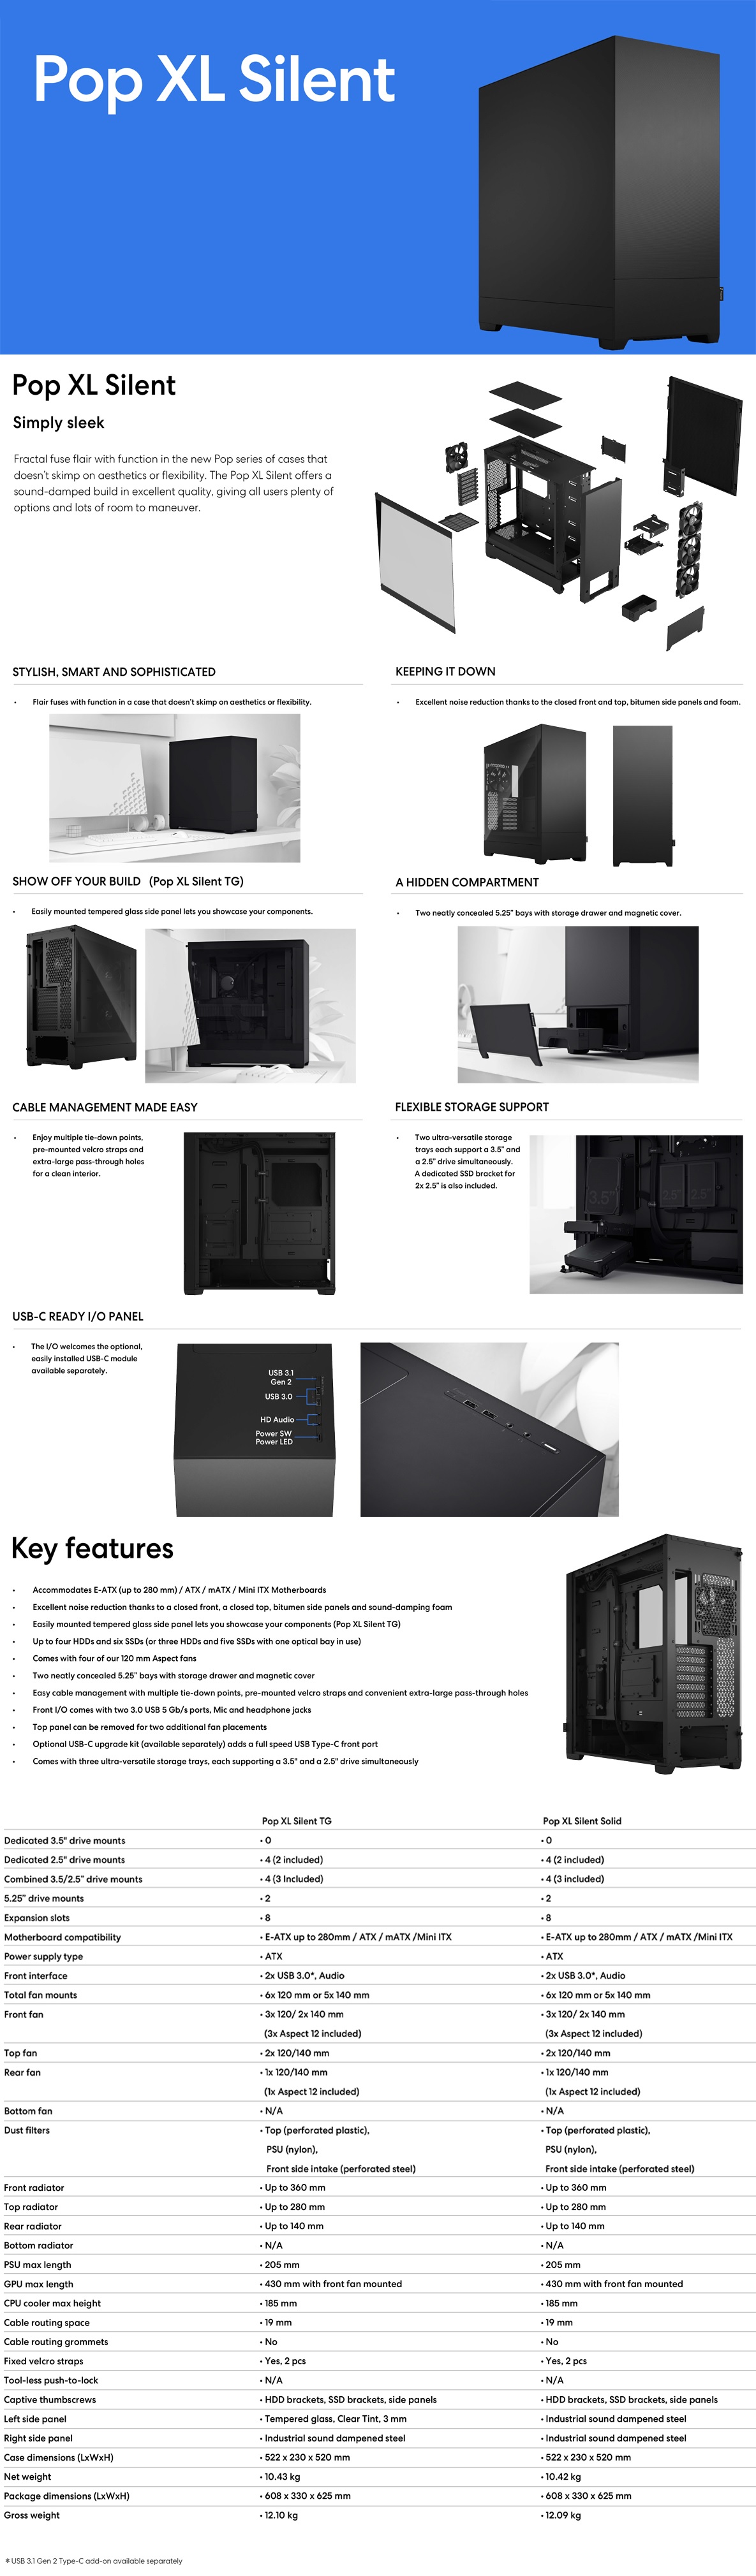 A large marketing image providing additional information about the product Fractal Design Pop XL Silent Full Tower Case - Black - Additional alt info not provided